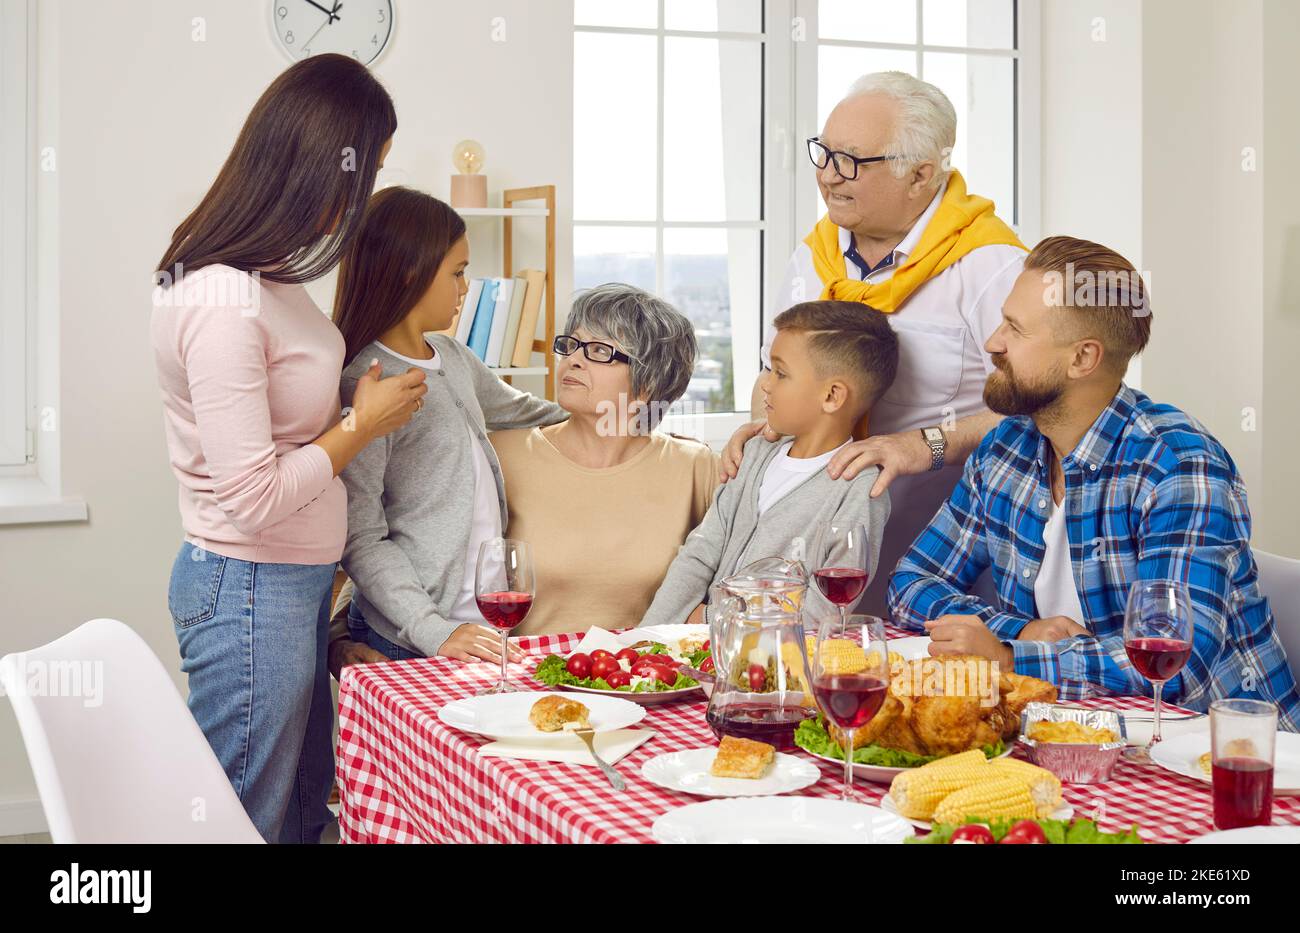 Big family congratulates granny, they are hugging during family dinner at table in living room. Stock Photo